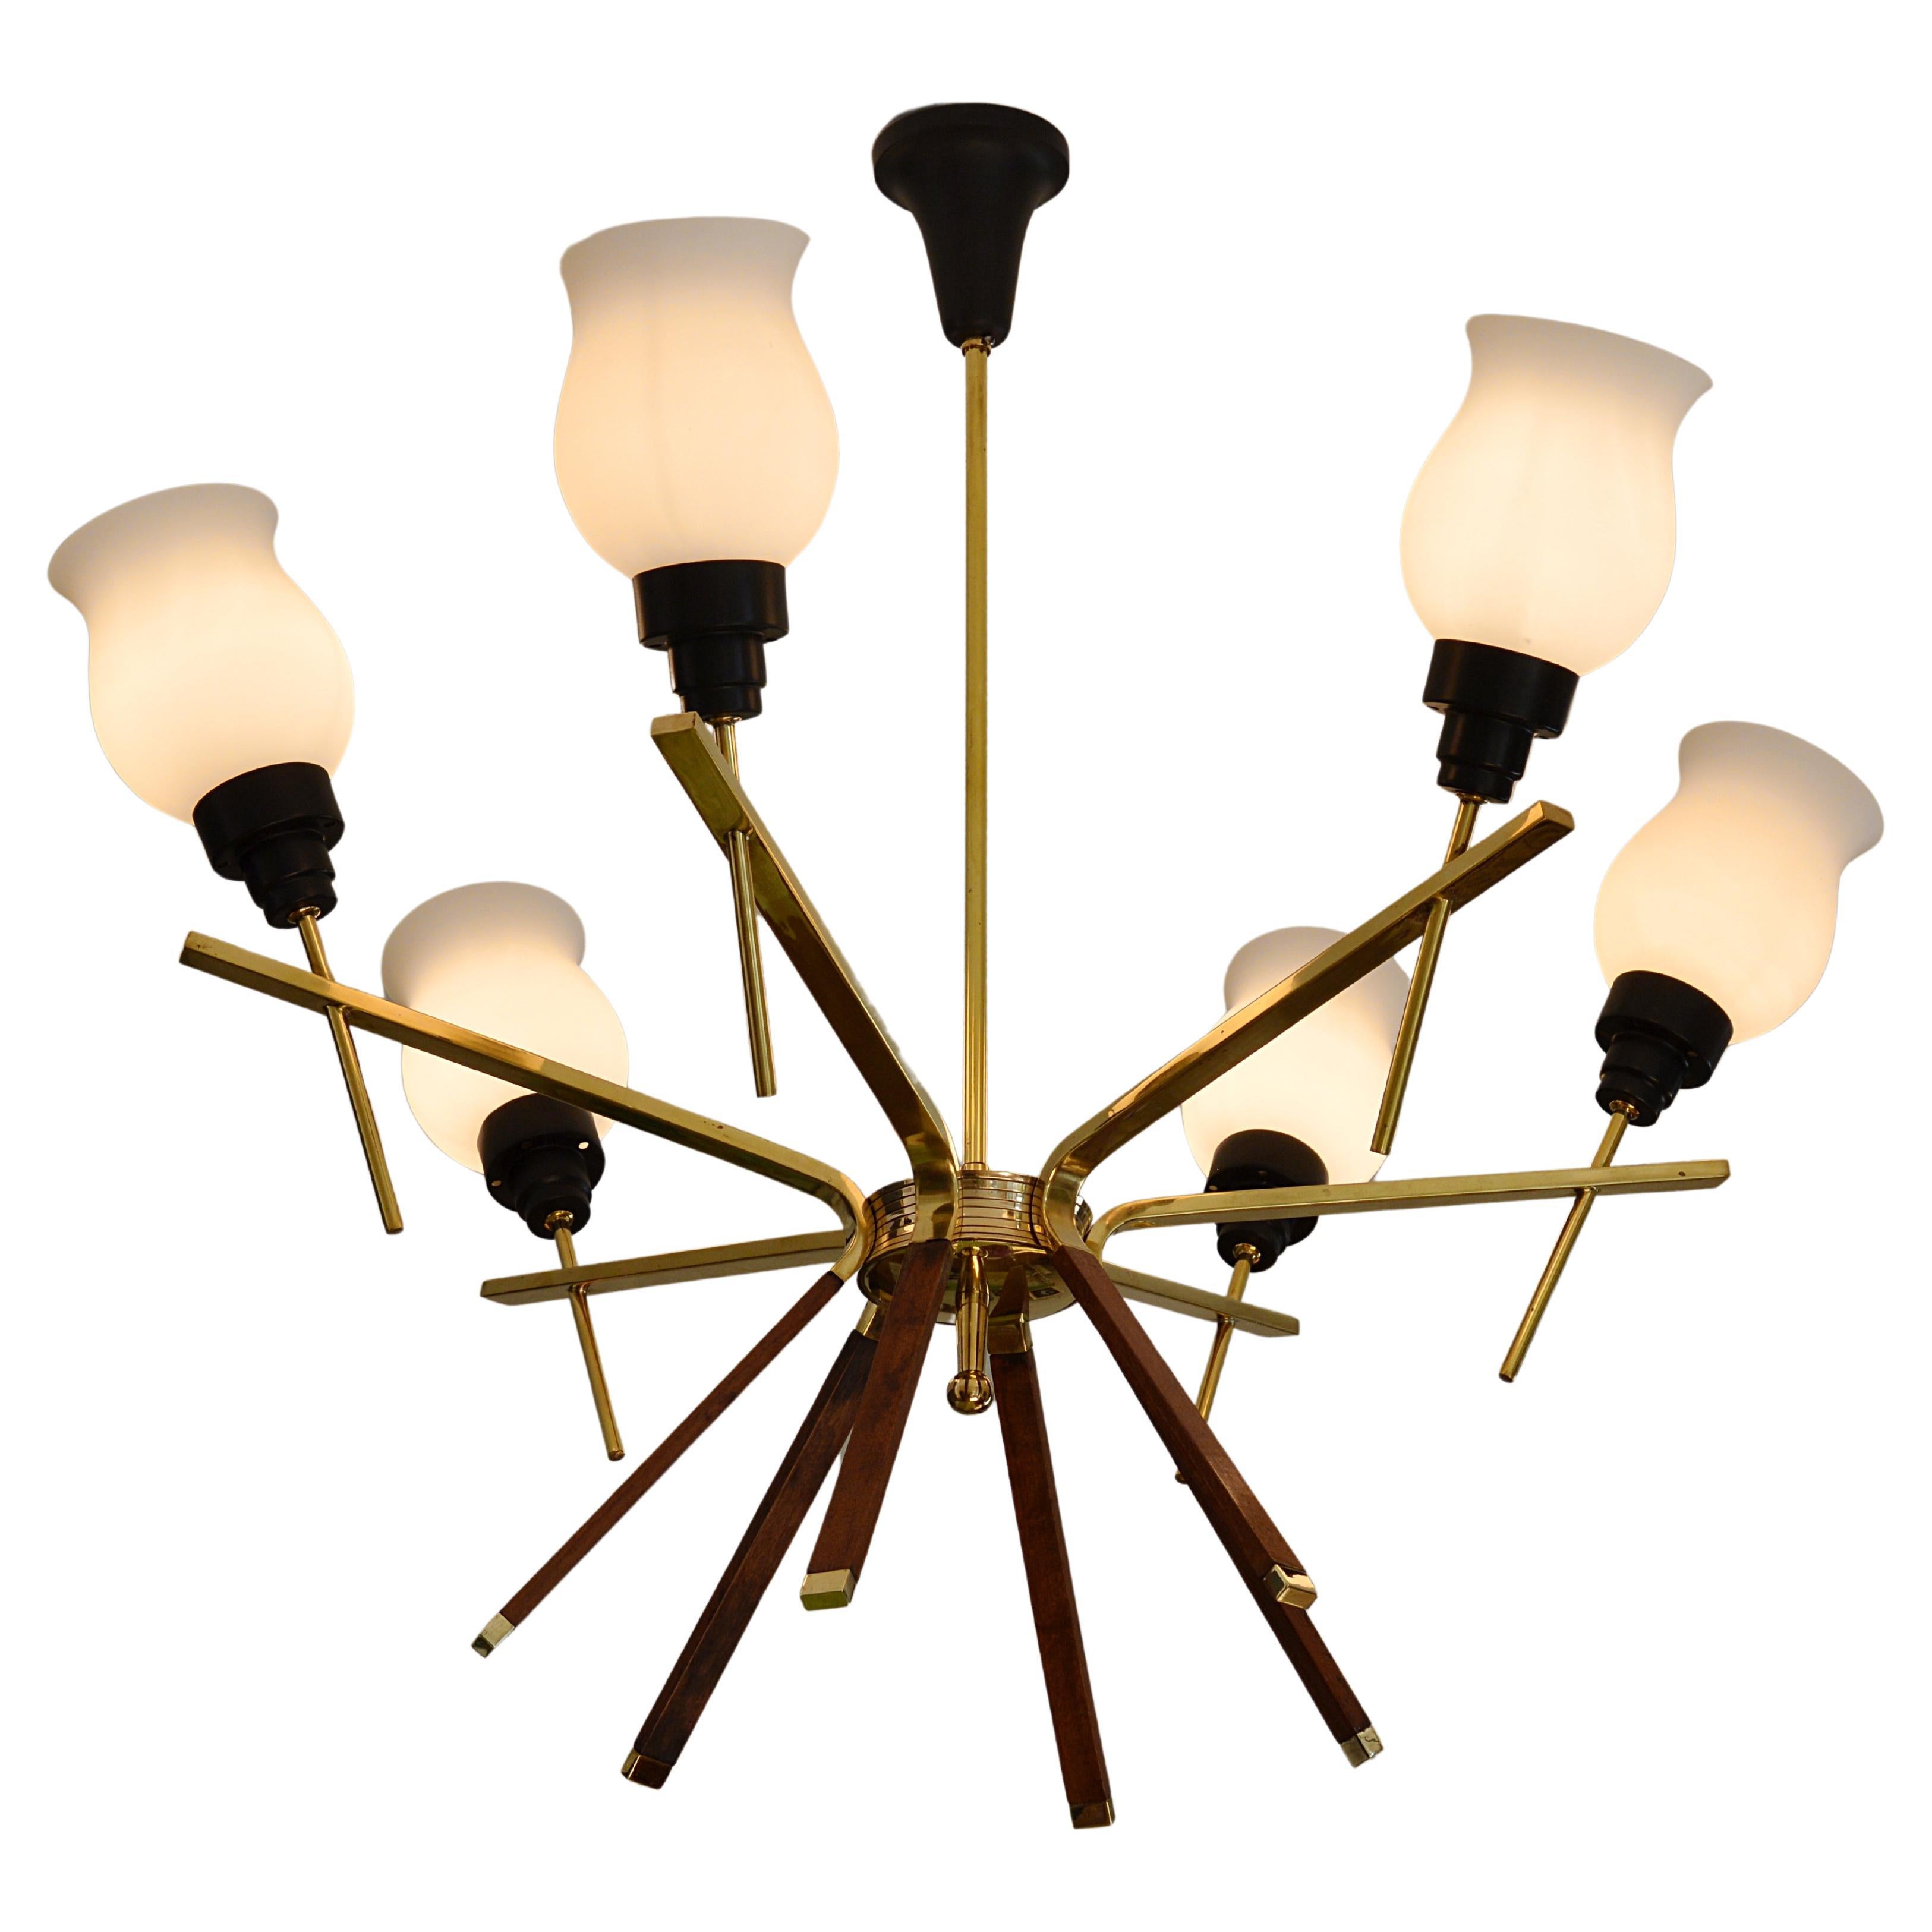 Arlus French Midcentury Chandelier, 1960s